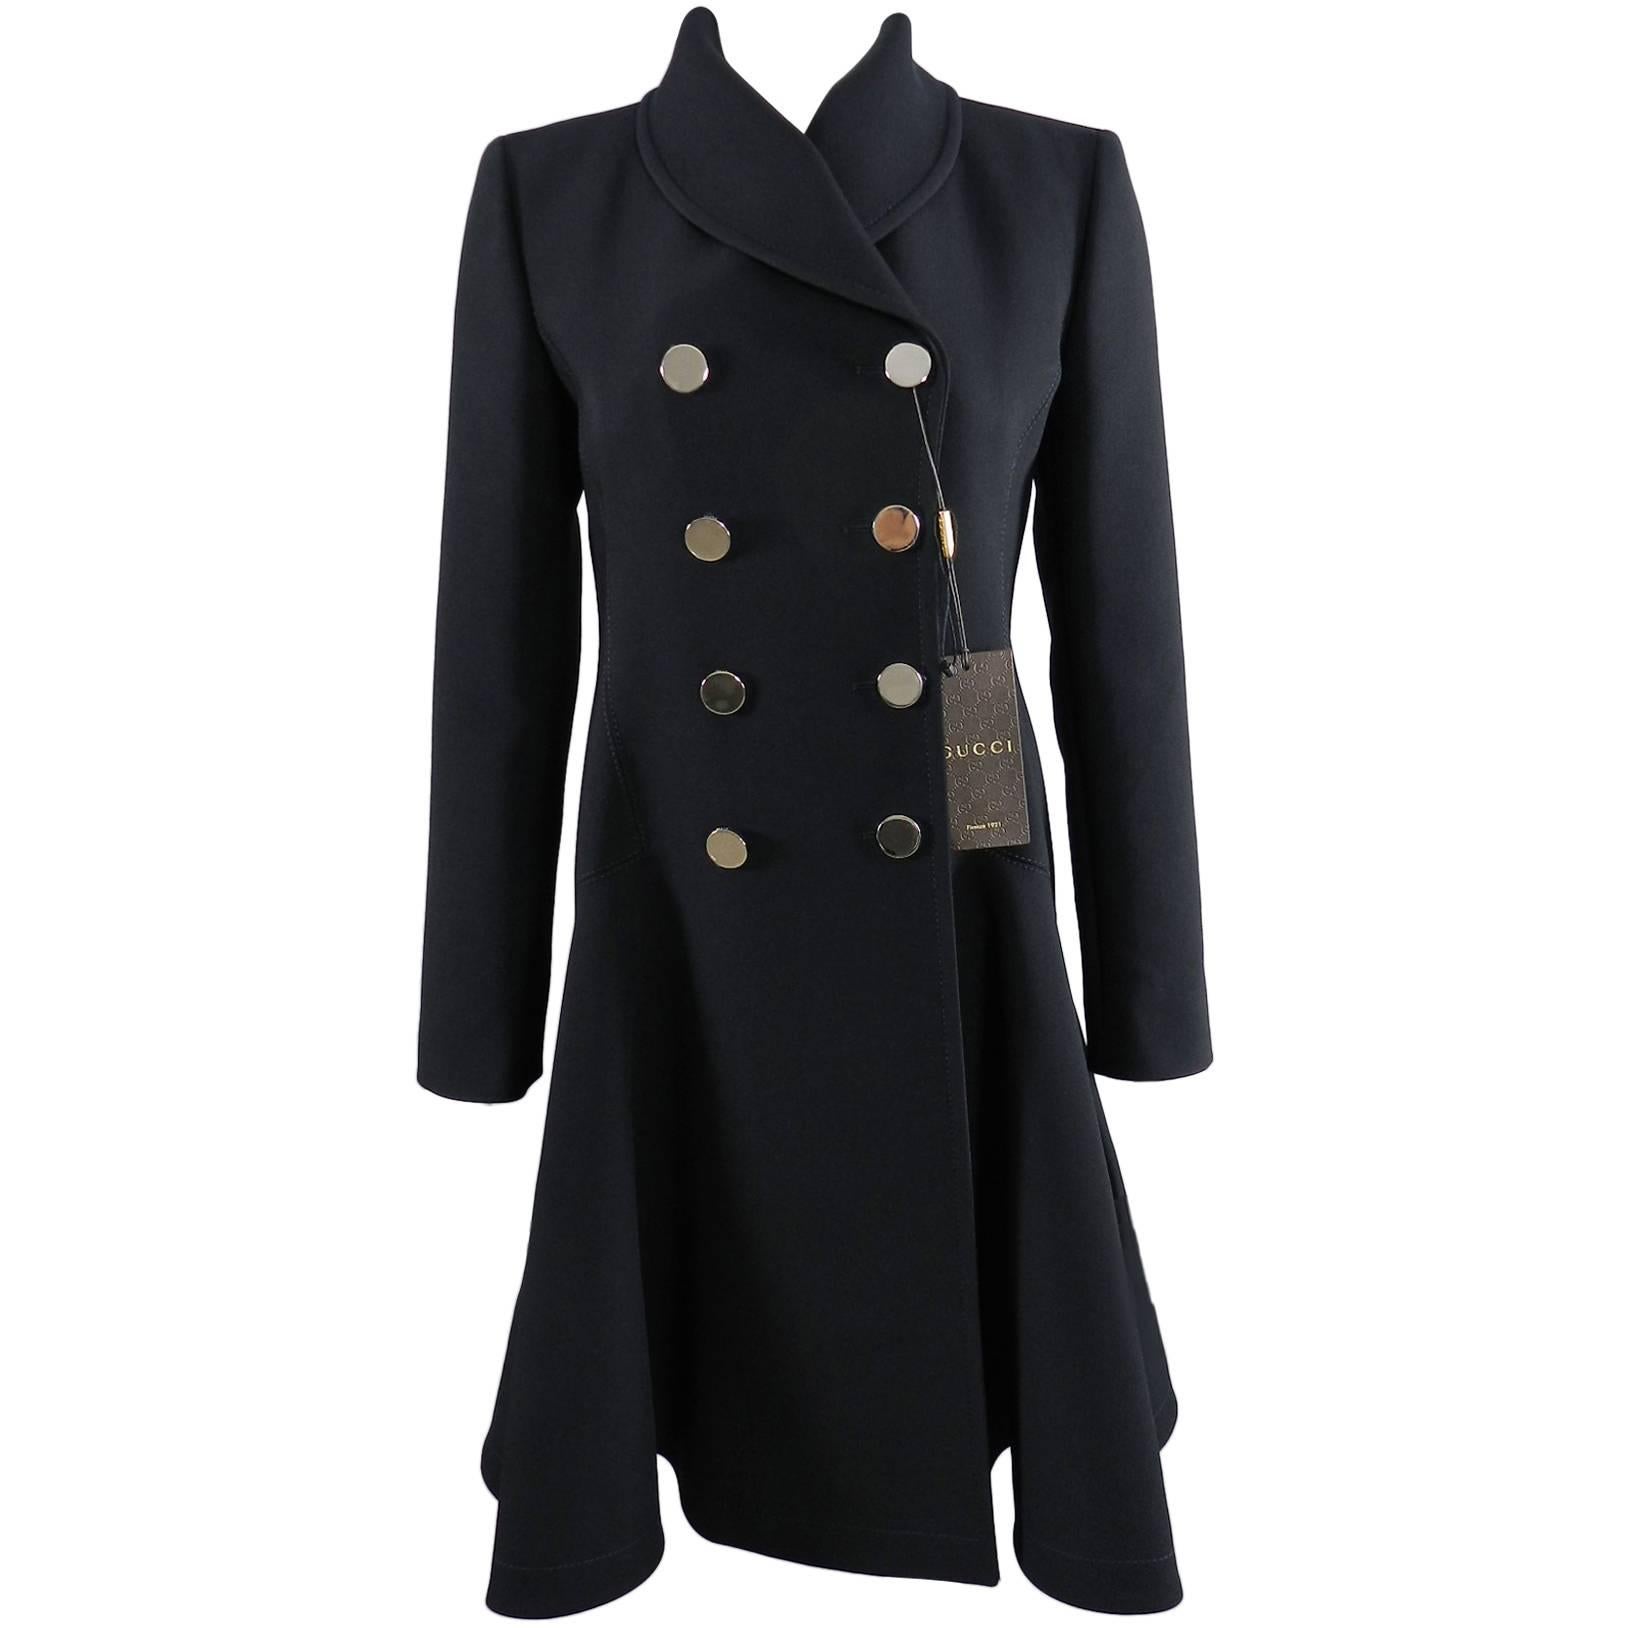 Gucci pre-fall 2014 Black Dress coat with Silver Buttons